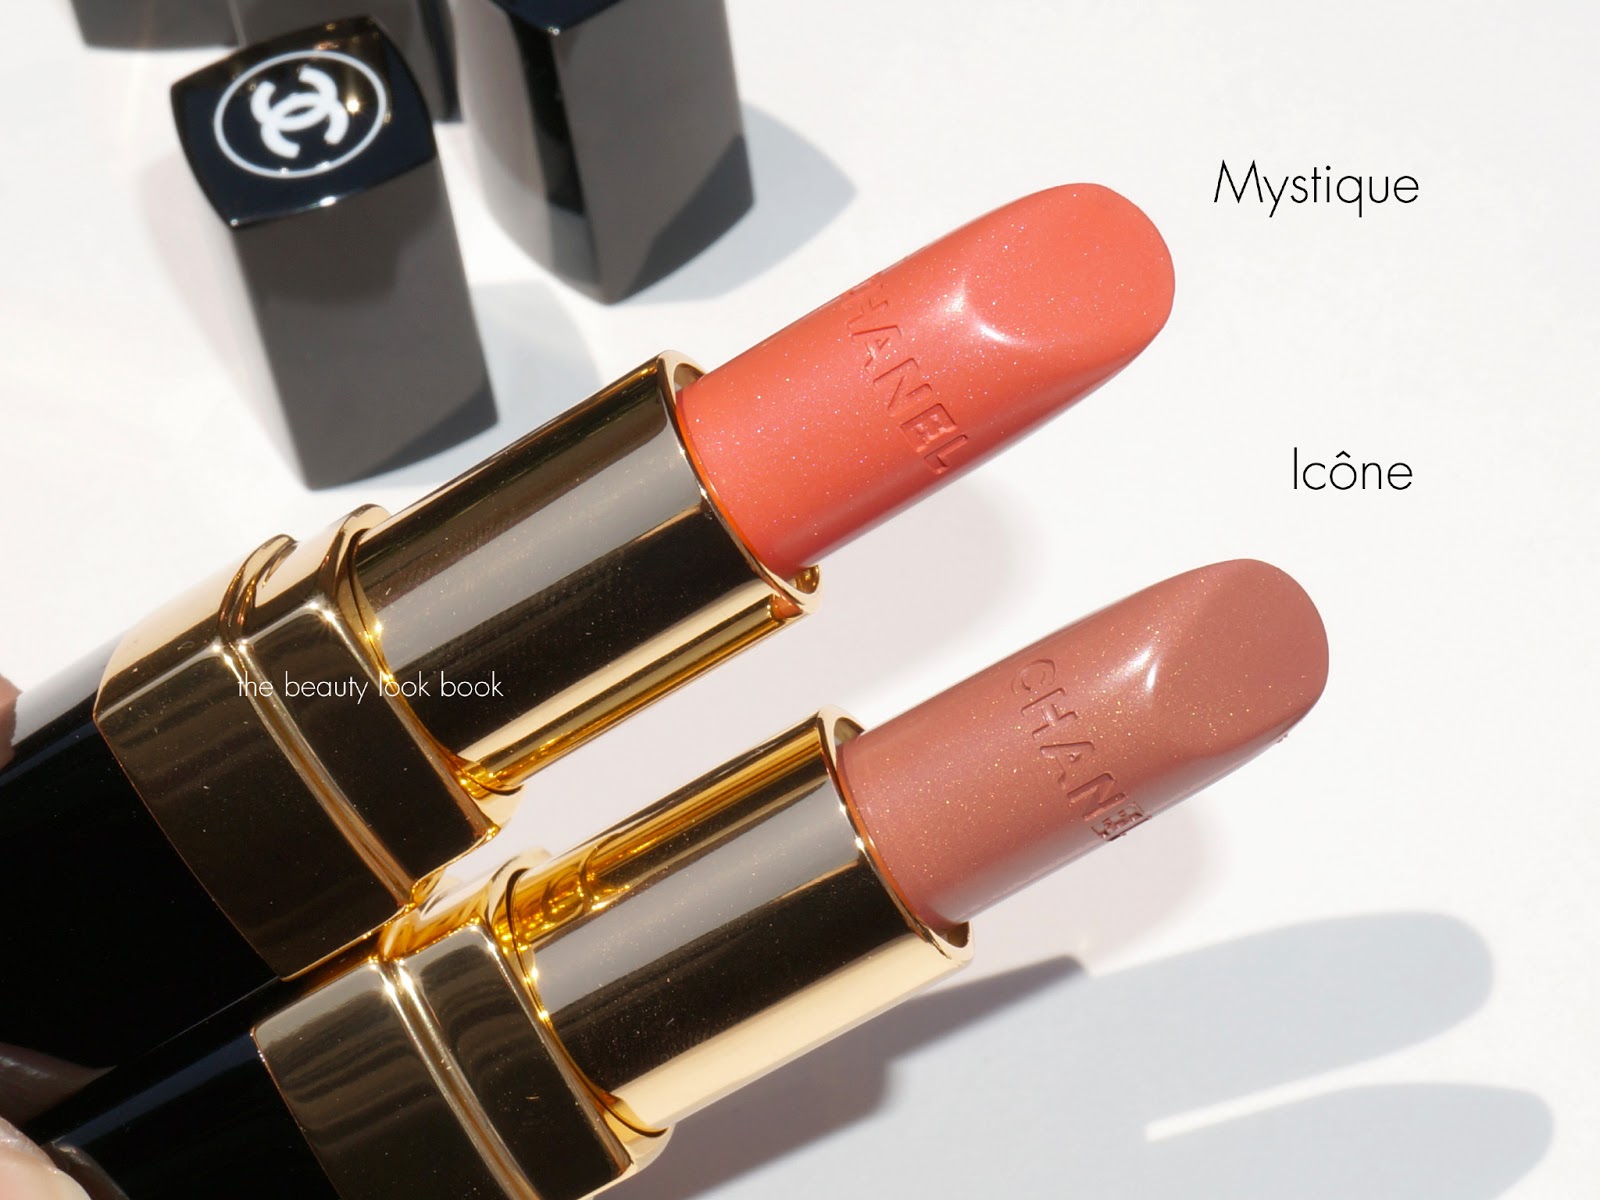 14 Iconic lipsticks that are really worth the hype